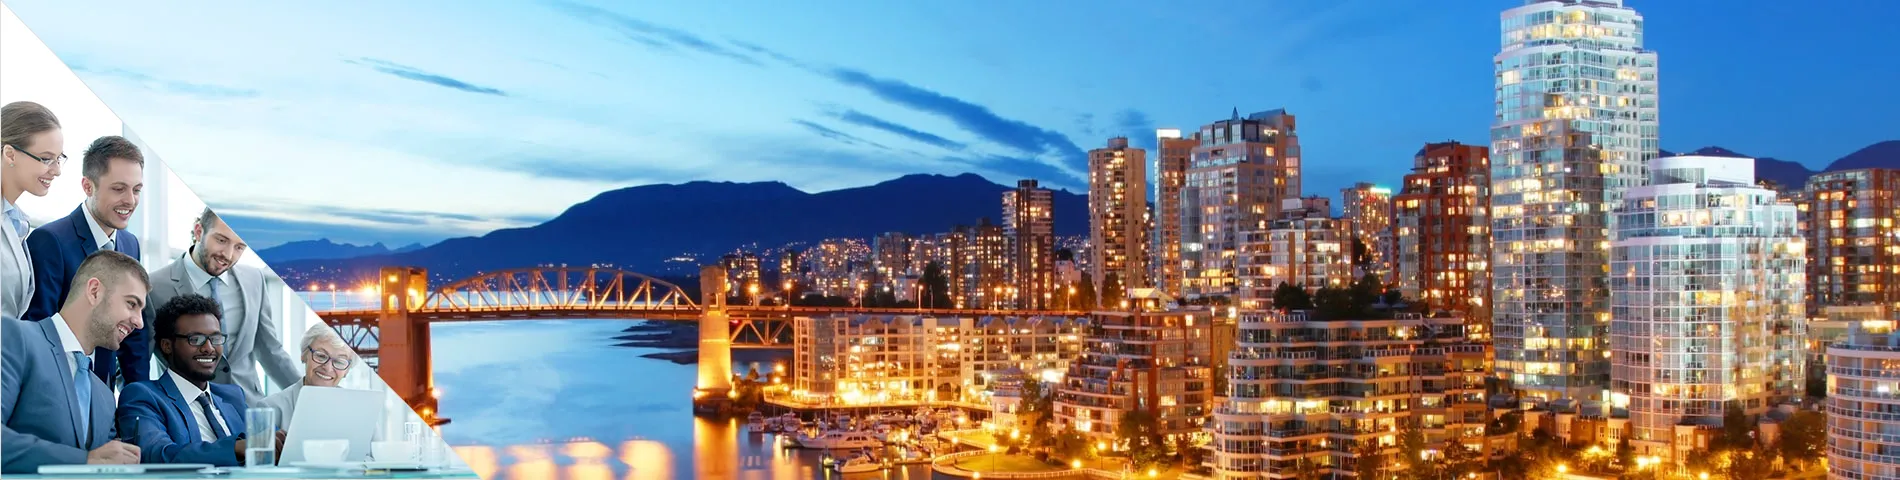 Vancouver - Business Group